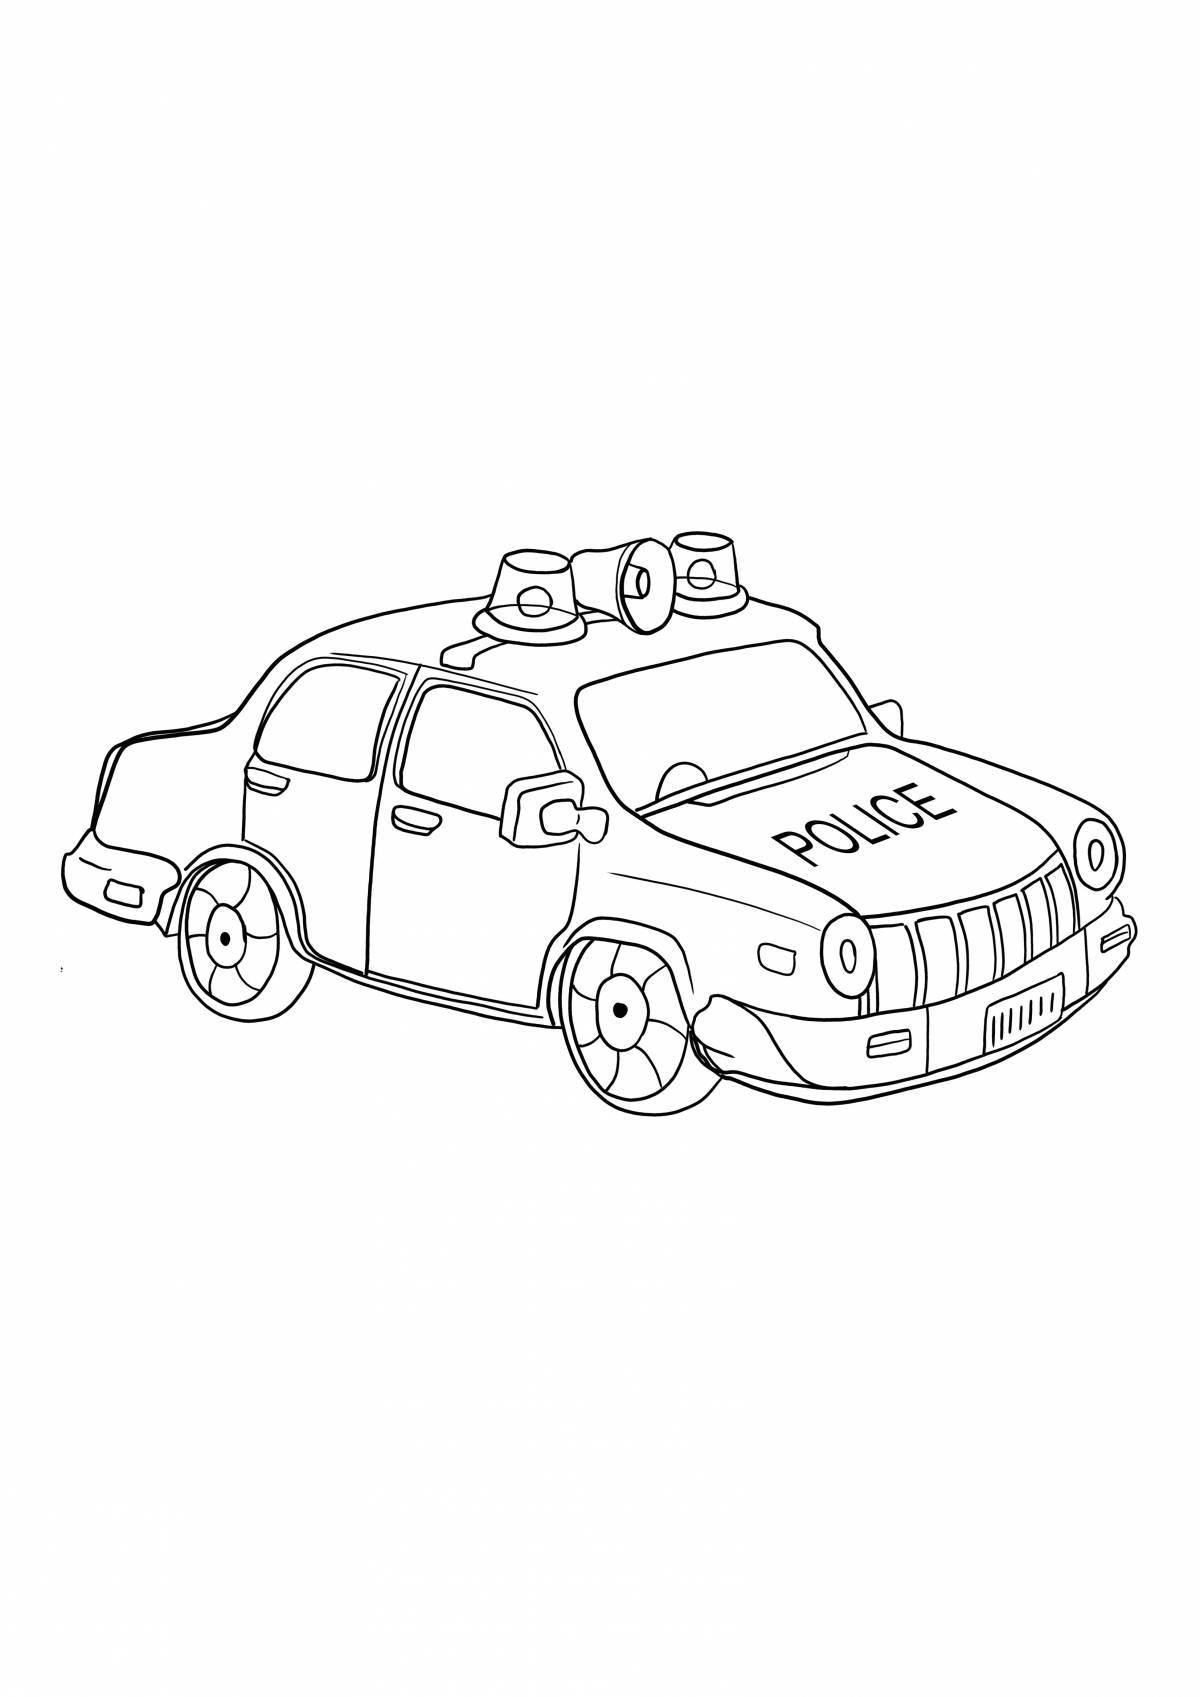 Fun coloring of a police car for children 5-6 years old